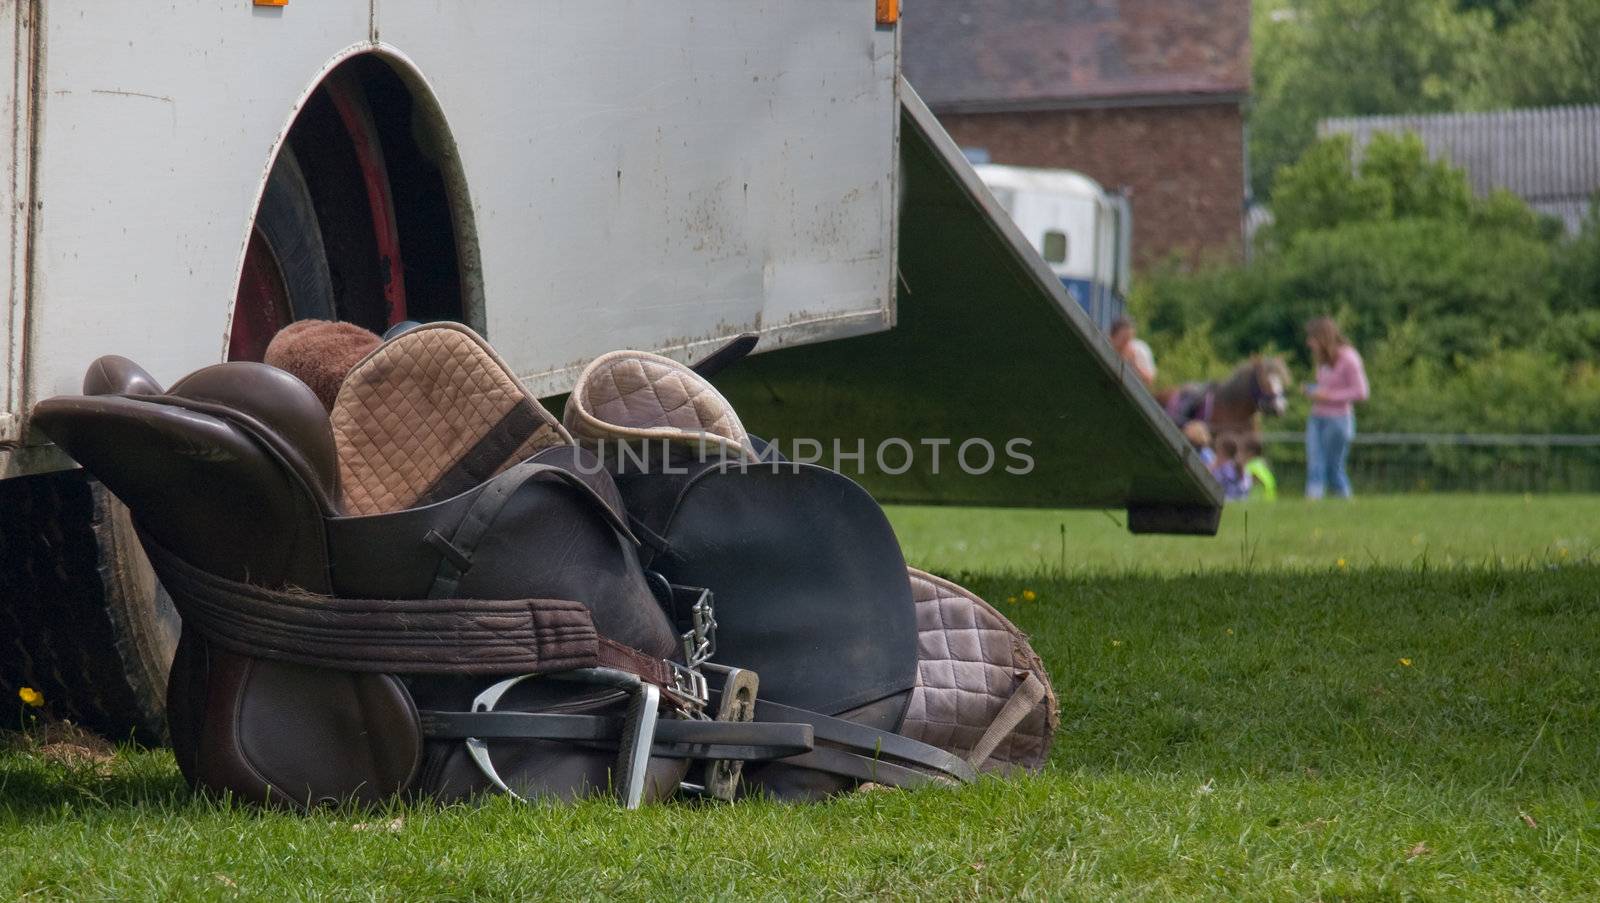 two saddles lying by a trailer at a horse event